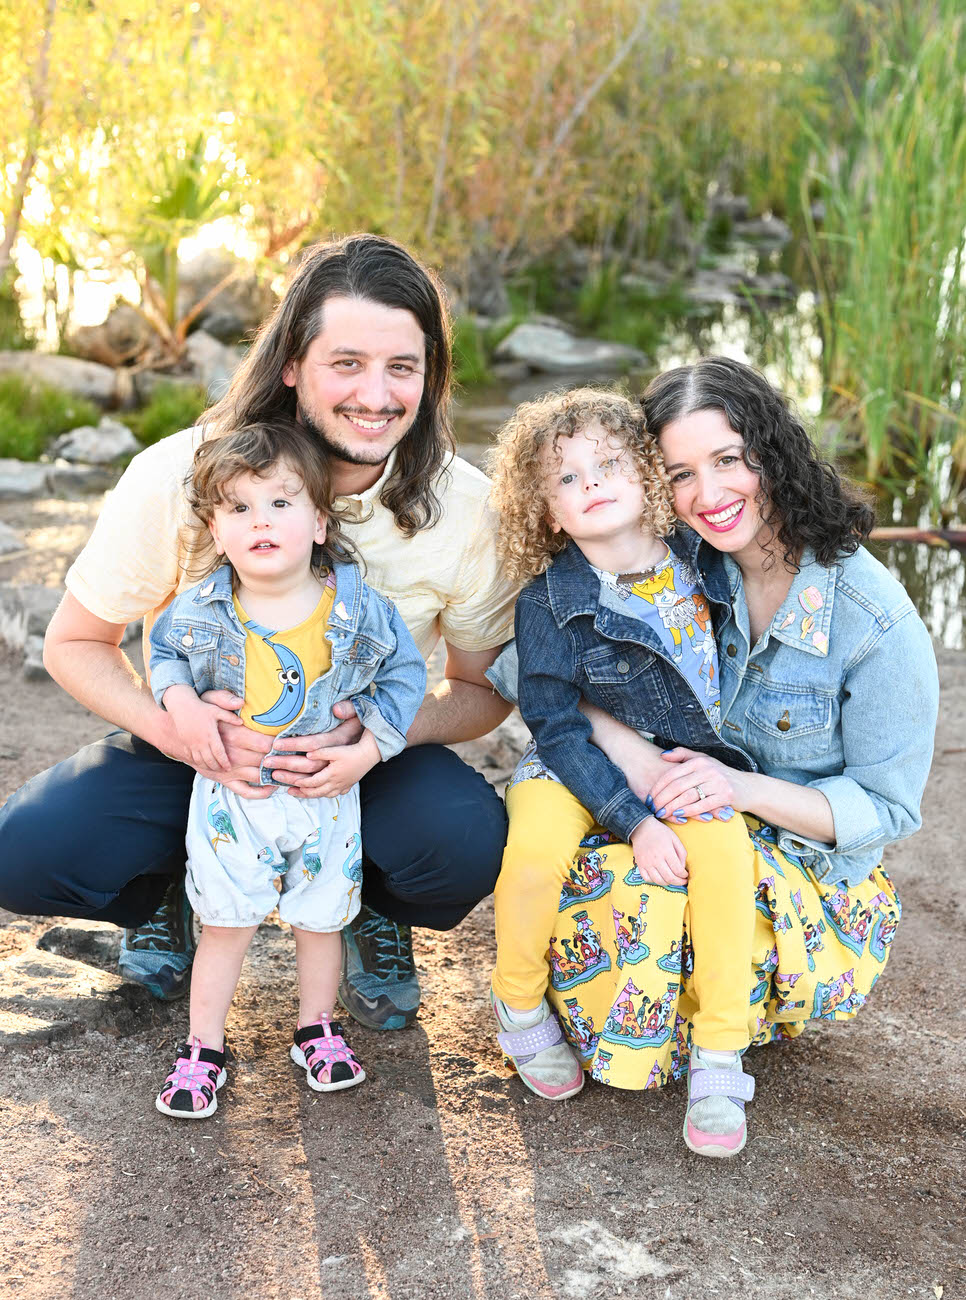 A joyful family of four with two young children wearing denim and yellow, posing together in an outdoor setting with lush greenery in the background.